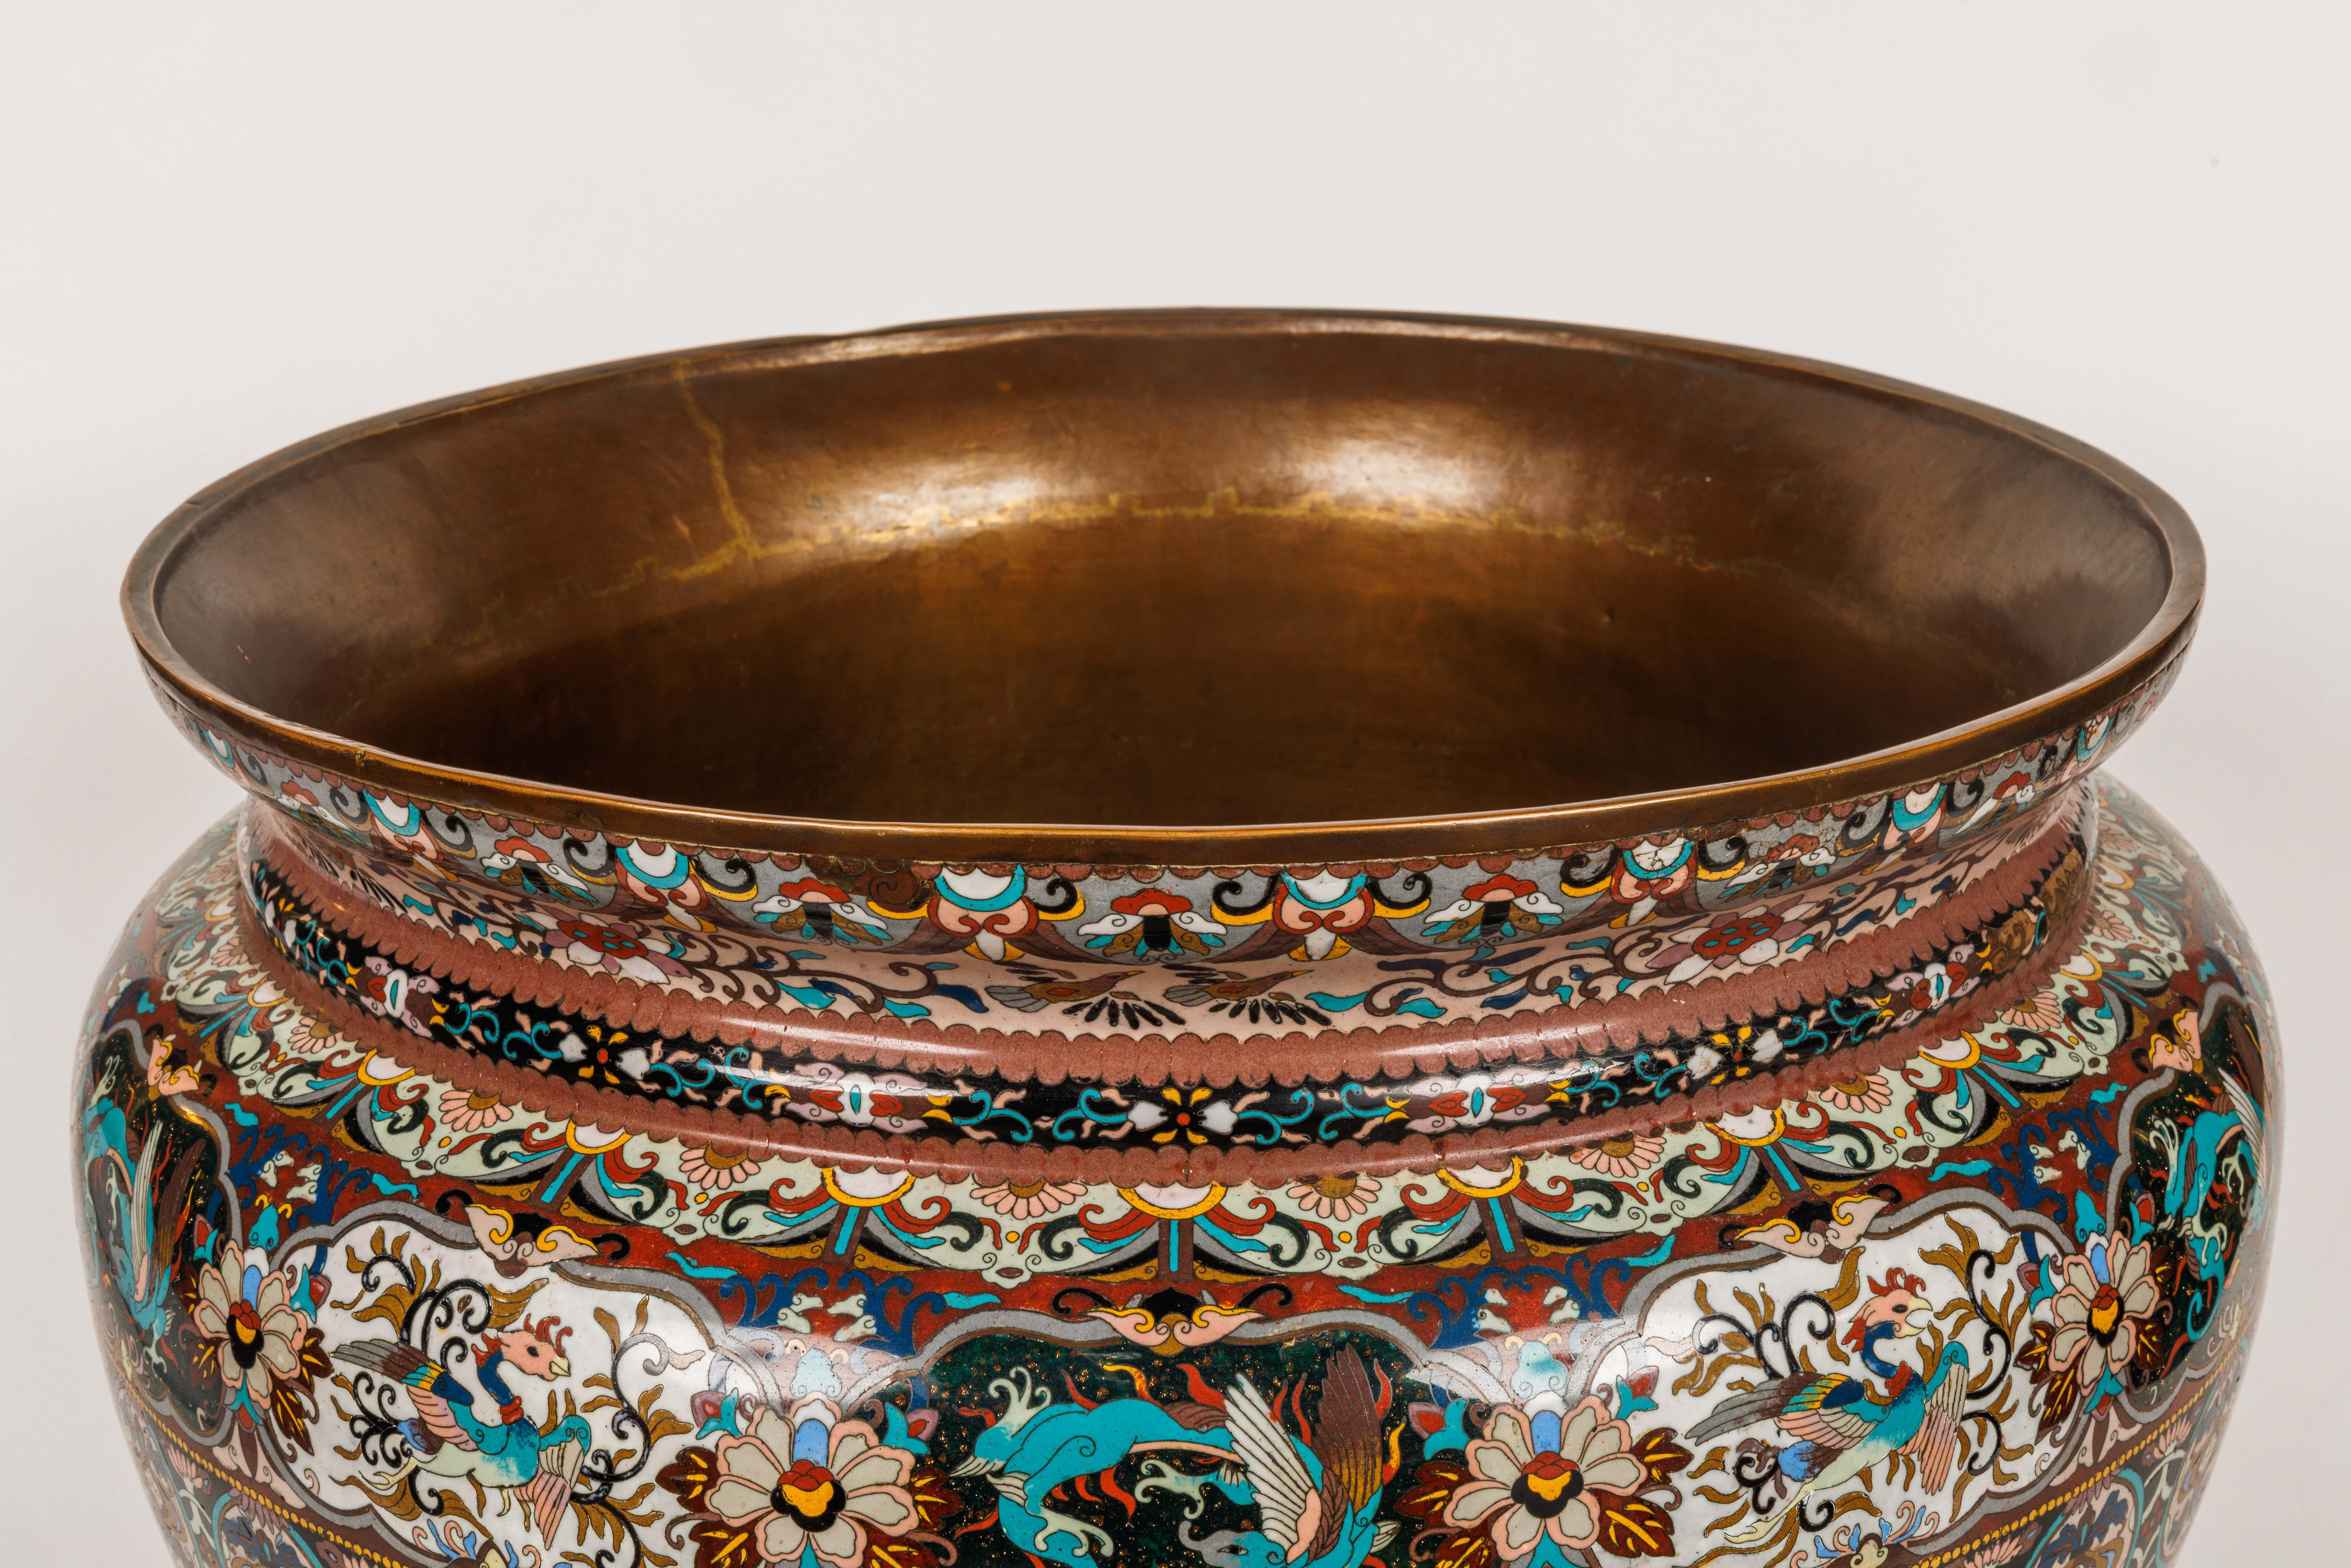 A Monumental Meiji Period Japanese Cloisonne Enamel Jardiniere.

This monumental Meiji Period Japanese cloisonne enamel jardiniere is a magnificent example of the exquisite craftsmanship and artistry that was prevalent in Japan during the late